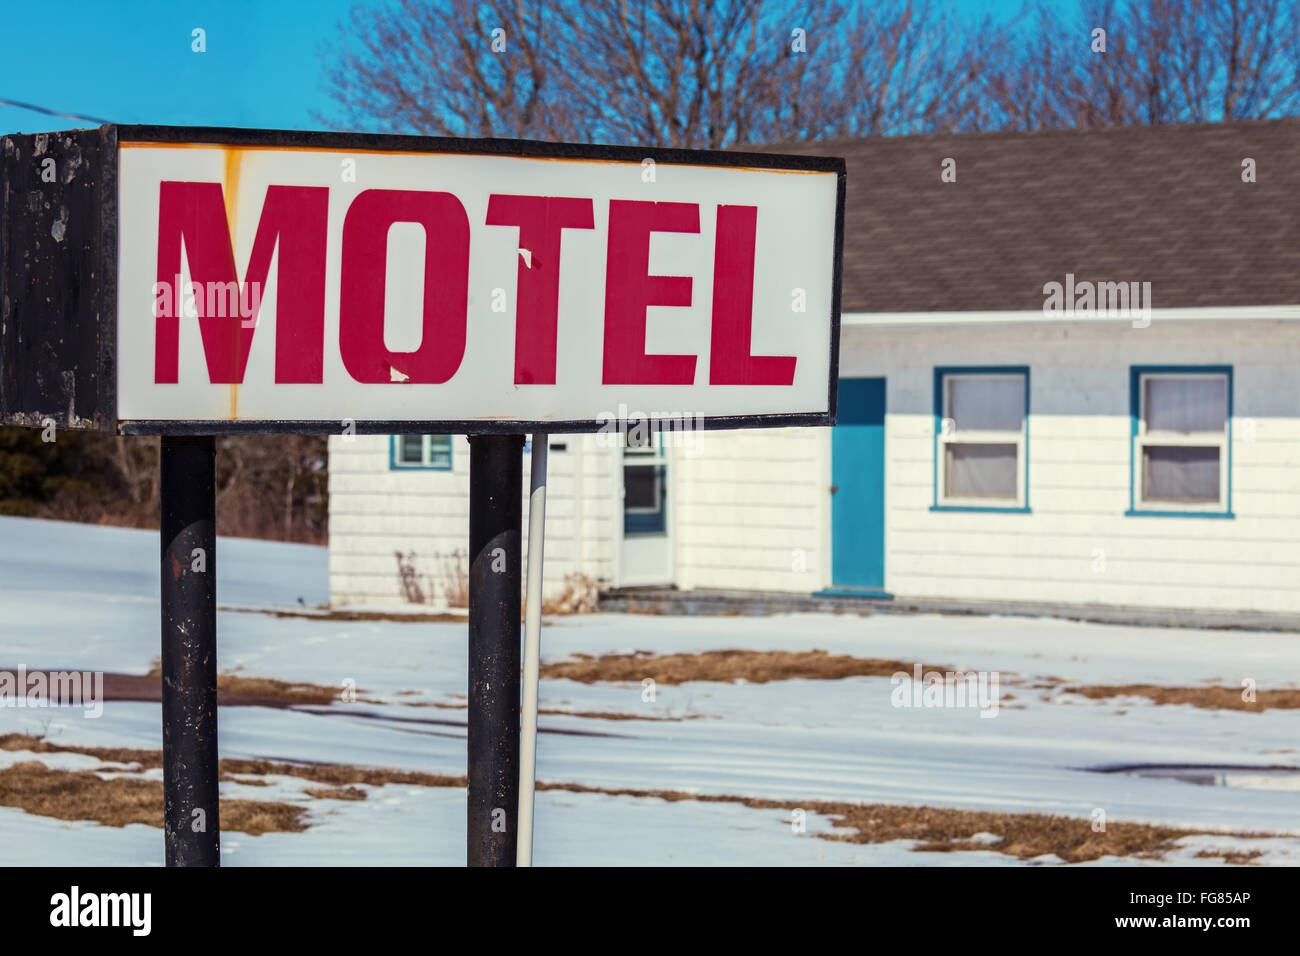 An old abandoned North American motel. Stock Photo